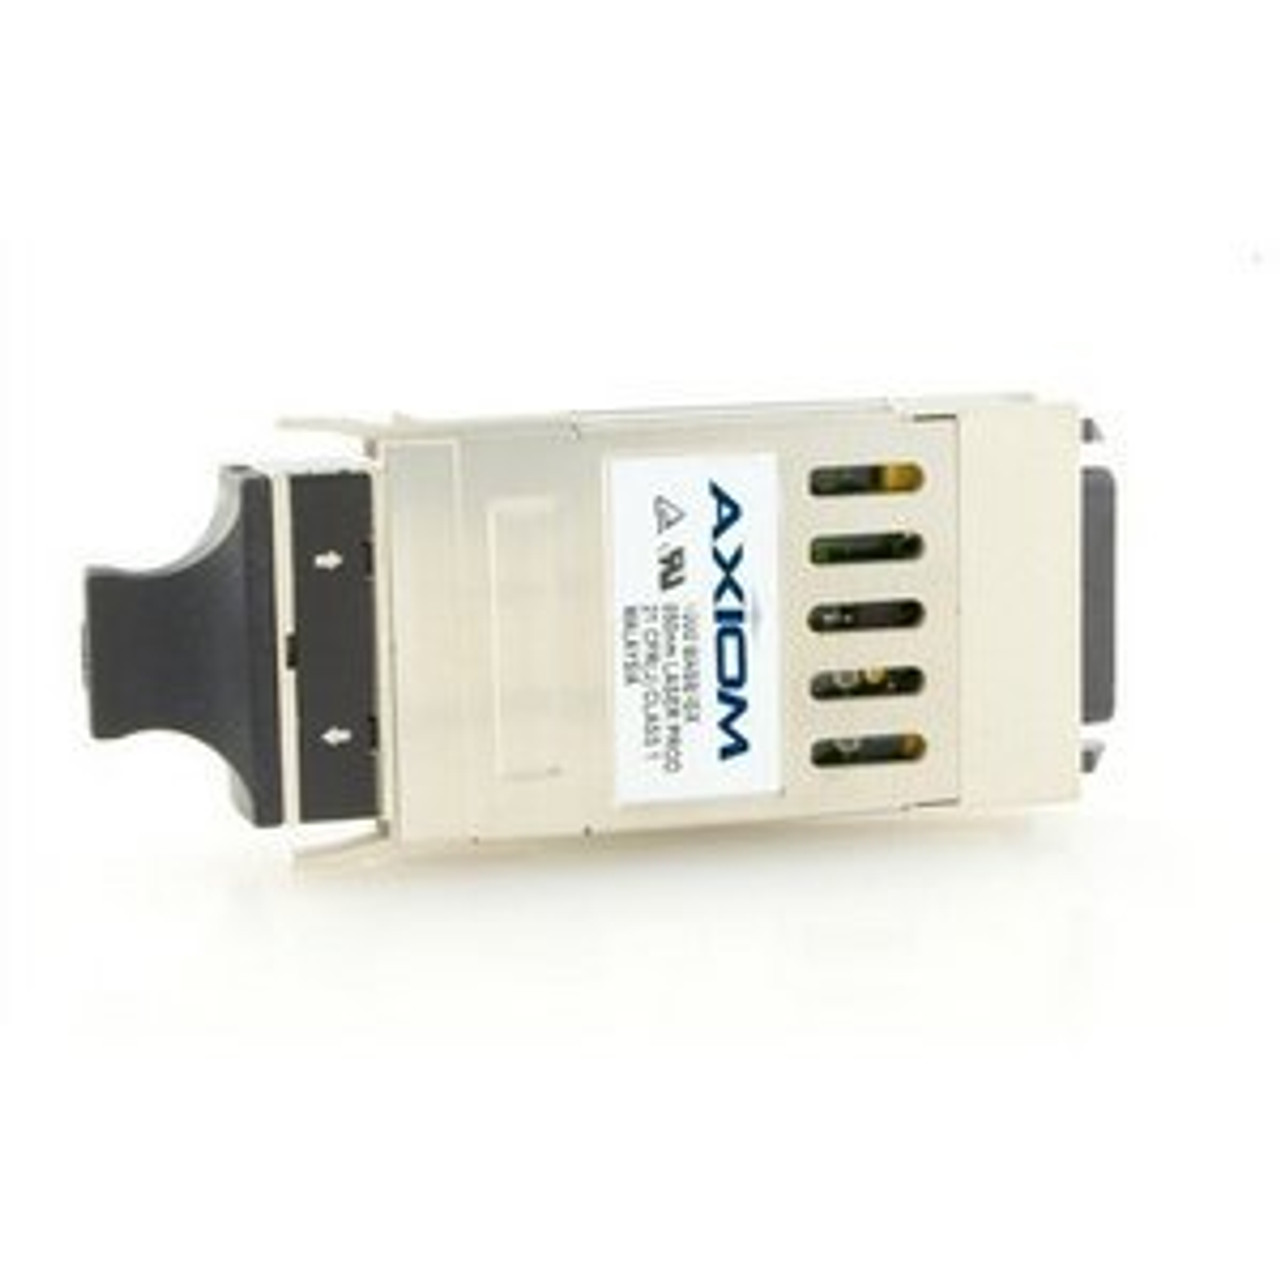 3CGBIC93-AX Axiom 1Gbps 1000Base-T Copper 100m RJ-45 Connector GBIC Transceiver Module for 3Com Compatible